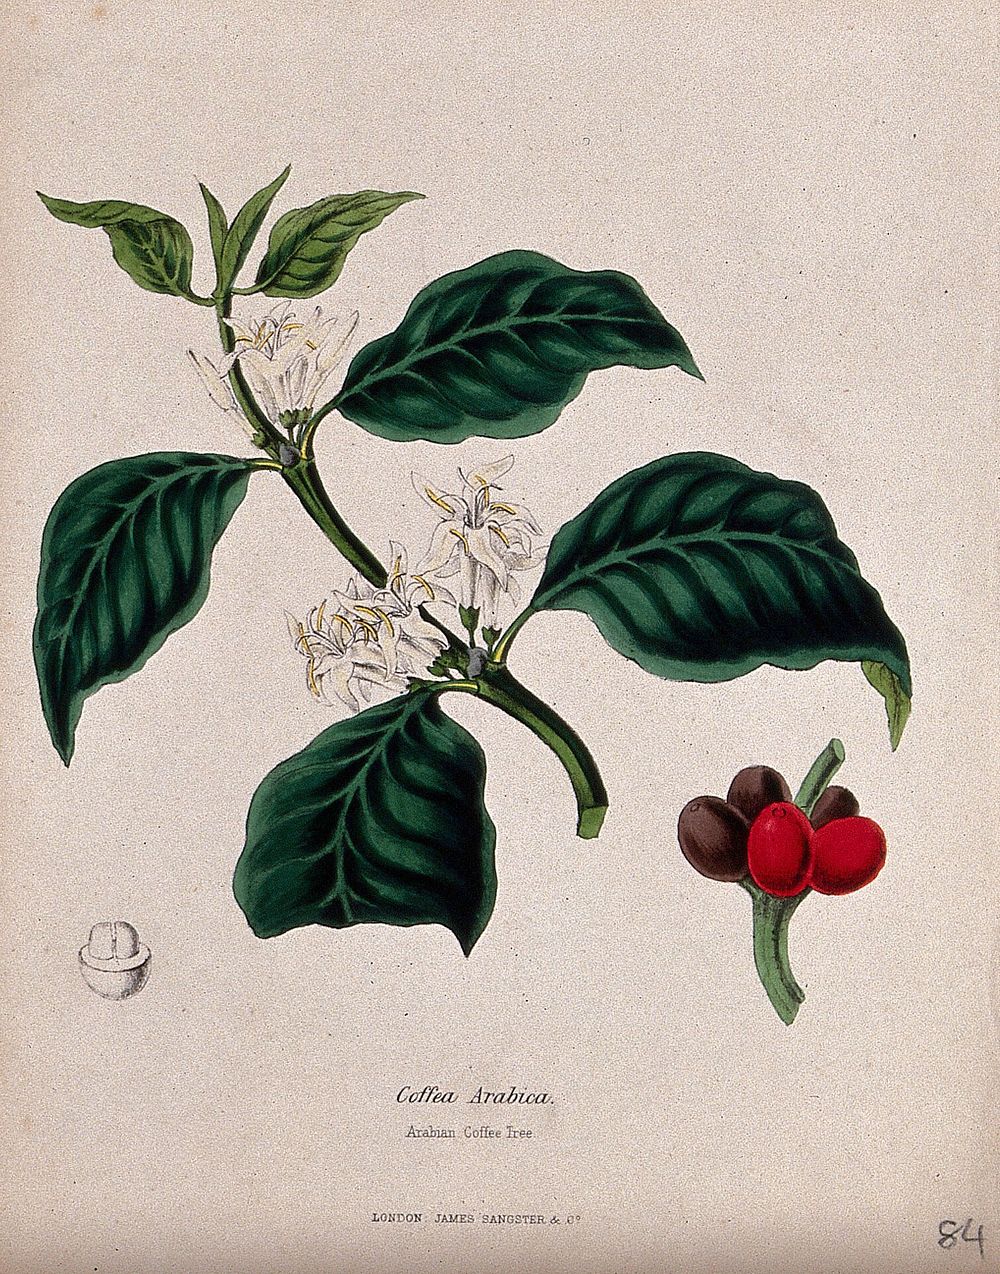 Arabian coffee tree (Coffea arabica): flowering stem, fruit and seed. Coloured zincograph, c. 1853, after M. Burnett.